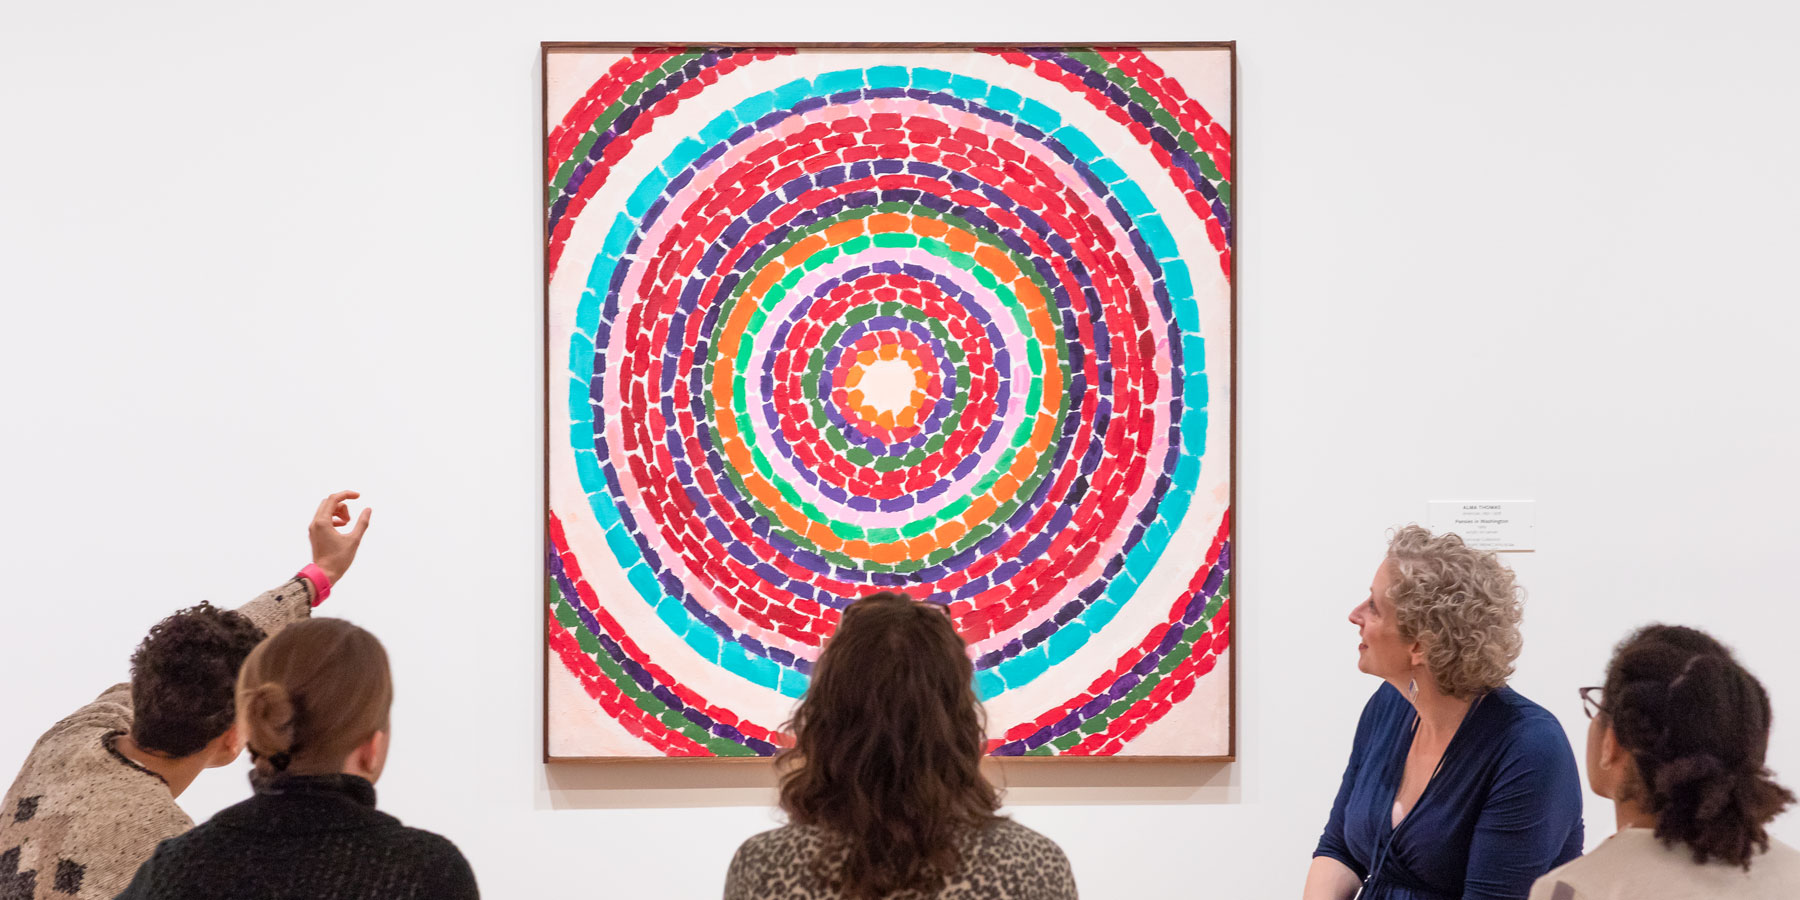 Five people are seated in a semi-circle looking at a painting that shows many multicolored circles radiating out from the middle of the composition. One of the people is pointing at the painting. 